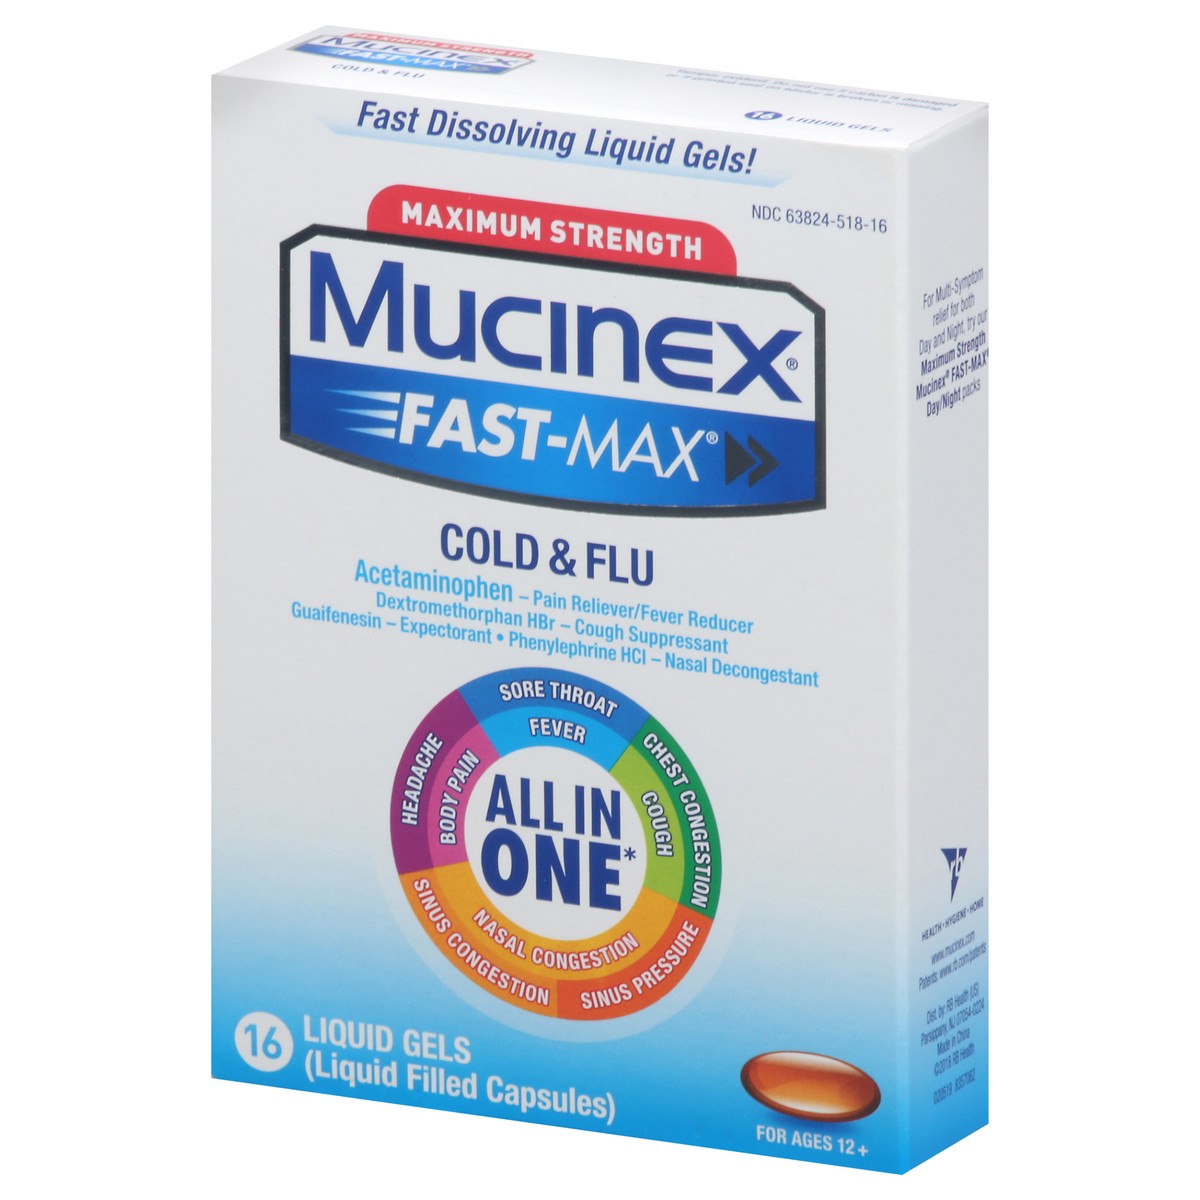 slide 2 of 9, Mucinex Maximum Strength Mucinex Fast-Max Cold & Flu All-In-One Liquid Gels, 16ct (Packaging May Vary), 16 oz